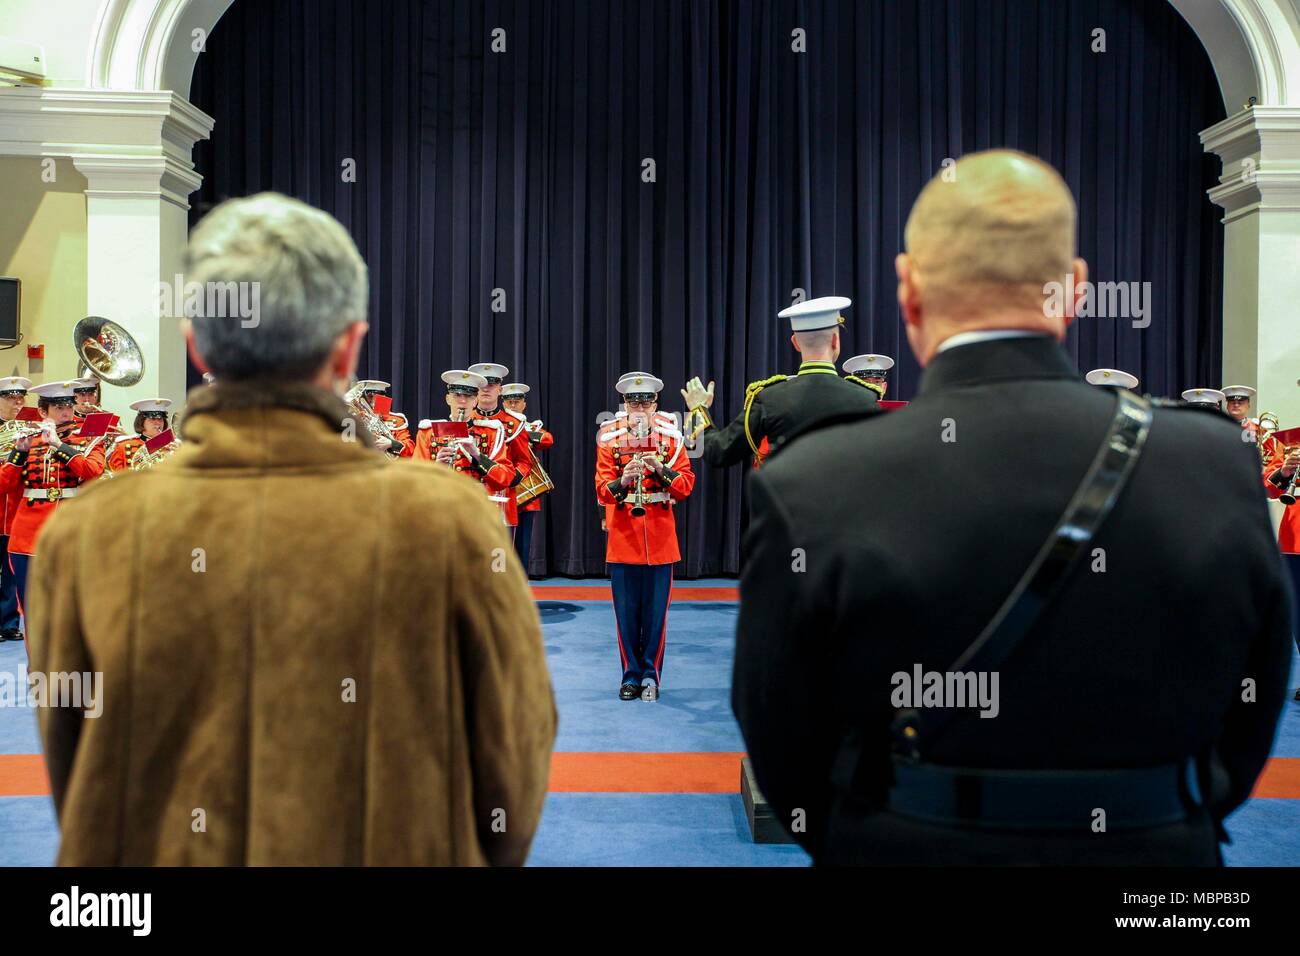 Commandant of the Marine Corps Gen. Robert B. Neller and wife, D’Arcy Neller watch the U.S. Marine Band during the 2018 Surprise Serenade at Marine Barracks Washington, Washington, D.C., Jan. 1, 2018. The Surprise Serenade is a tradition that dates back to the mid-1800’s in which the U.S. Marine Band performs music for the Commandant of the Marine Corps at his home on New Years Day. (U.S. Marine Corps photo by Sgt. Olivia G. Ortiz) Stock Photo